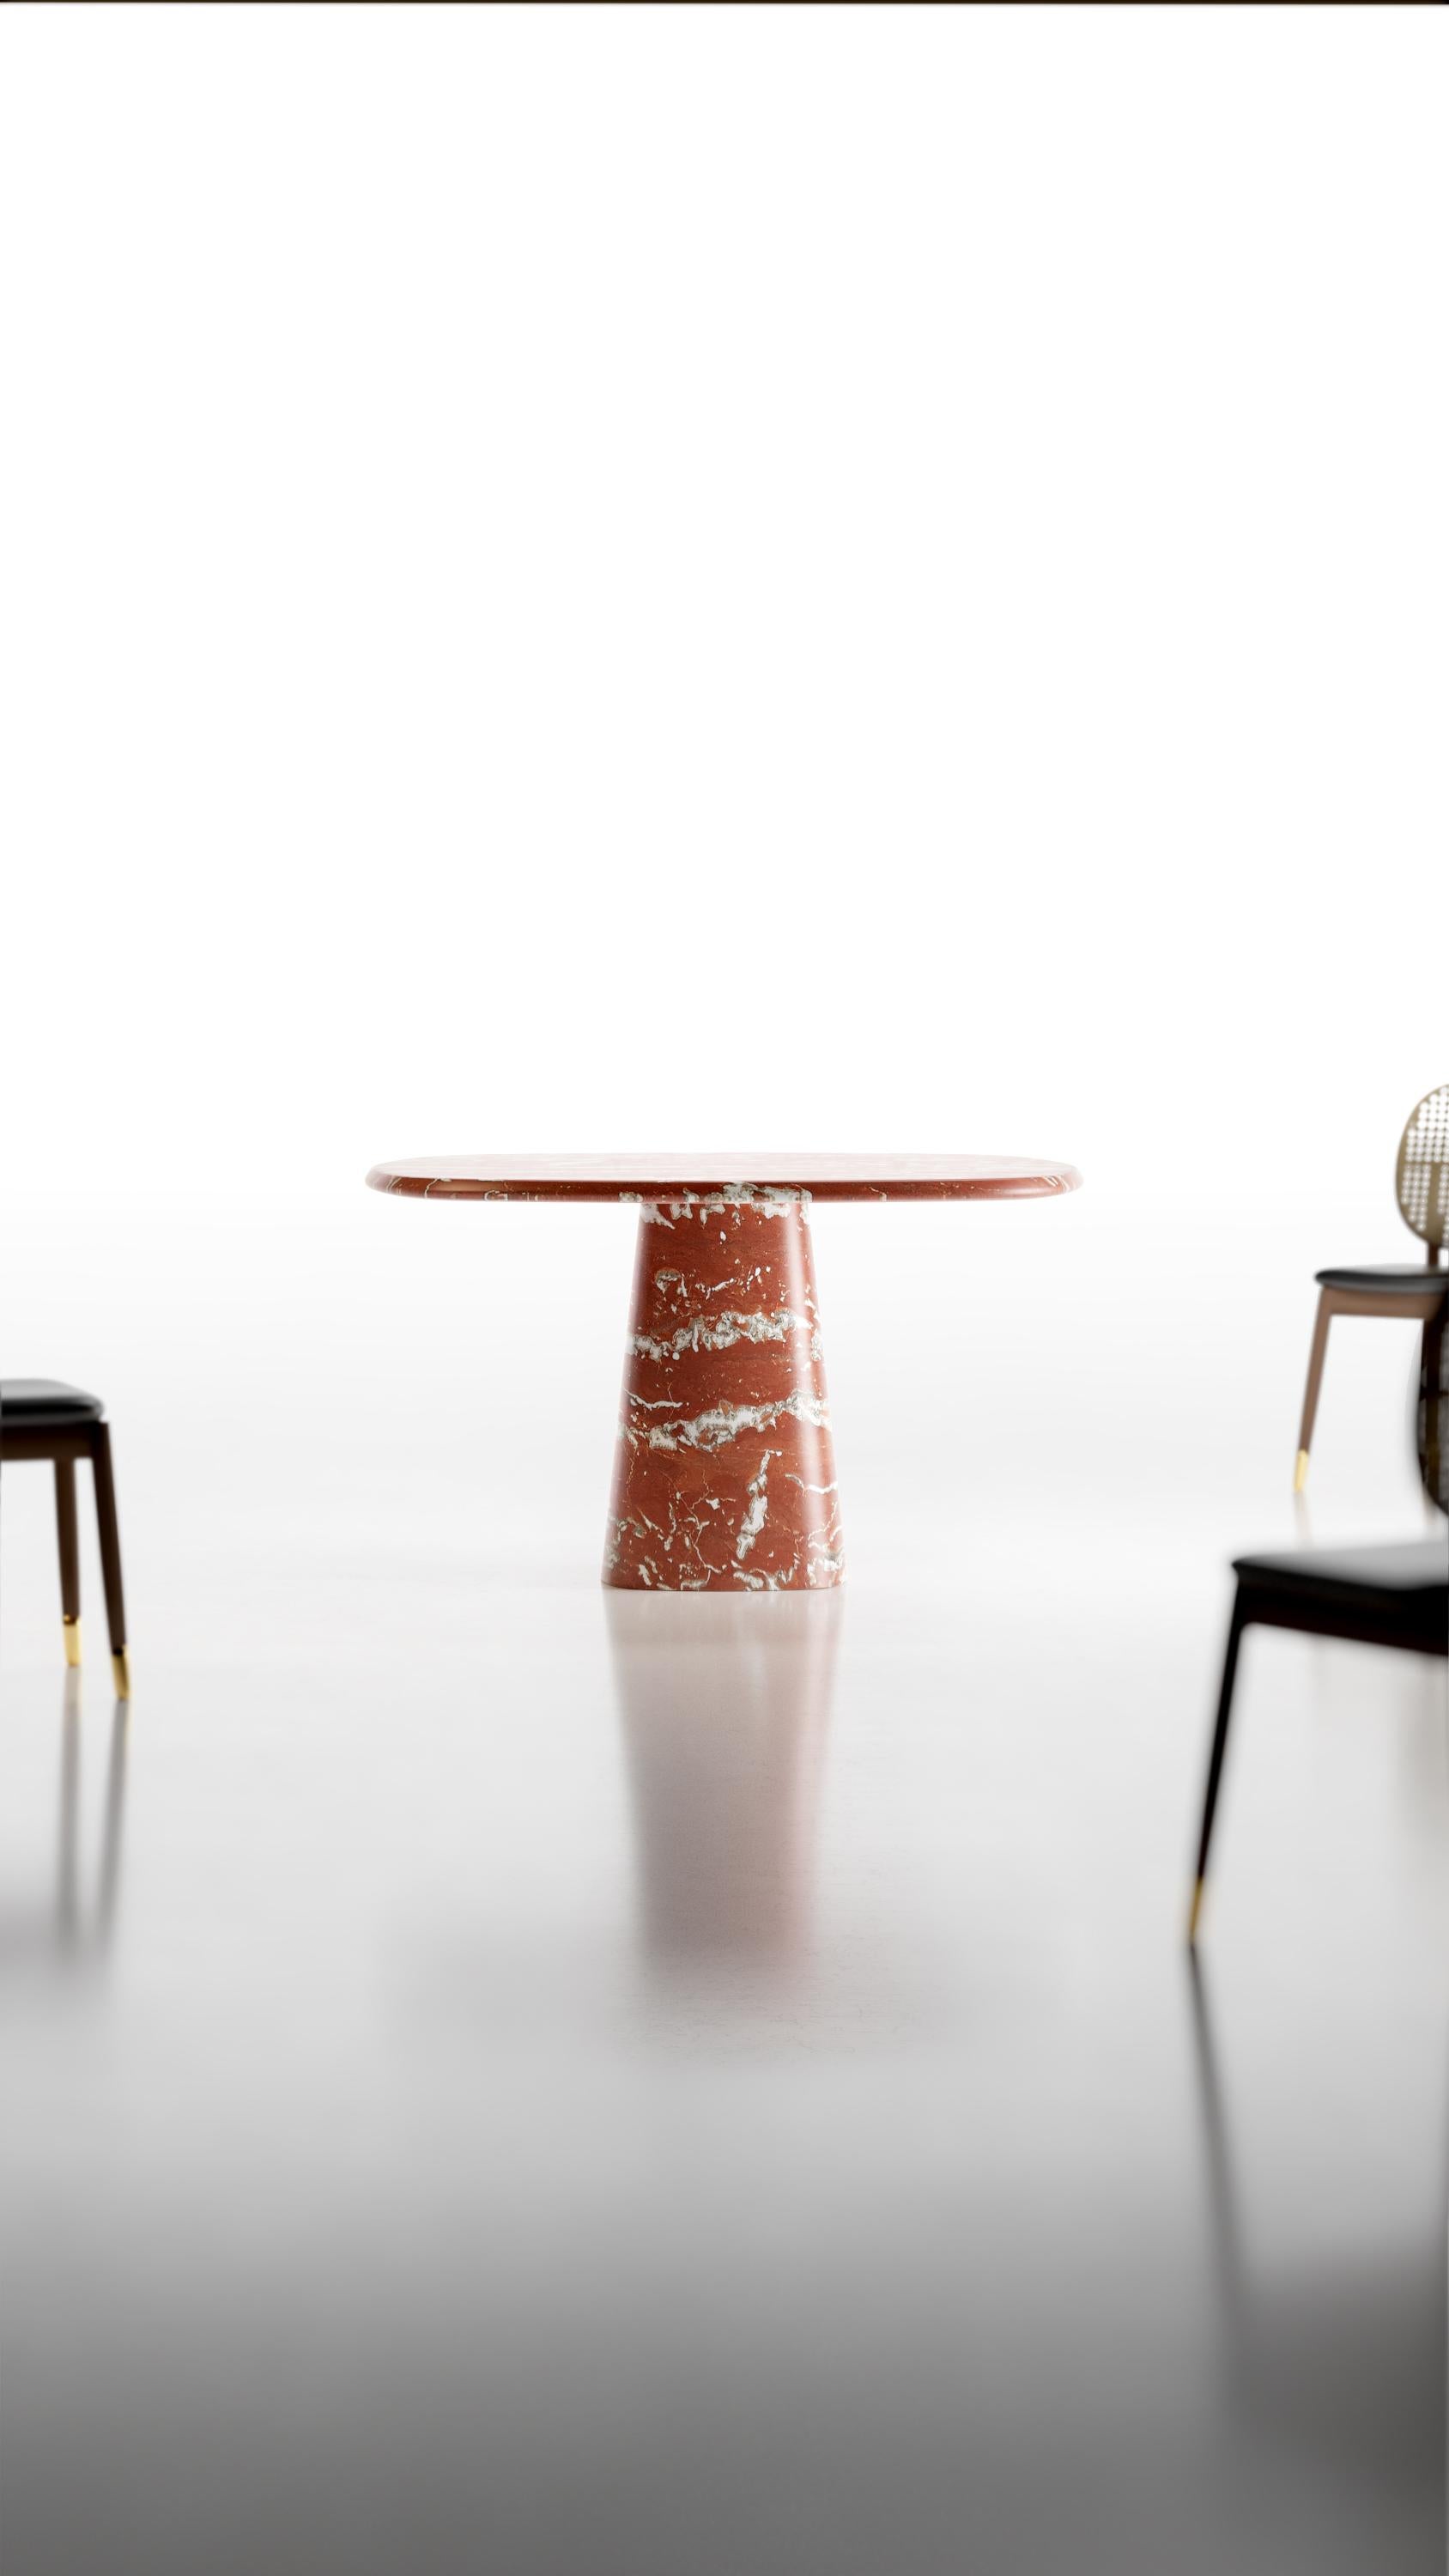 Rosso Francia Wedge Table by Marmi Serafini
Materials: Rosso Francia marble.
Dimensions: D 130 x H 75 cm
Other marbles available (prices may vary): Kilknos, Travertino Silver, Rosso Francia, Calacatta Macchia Vecchia.


Marmi Serafini is located in